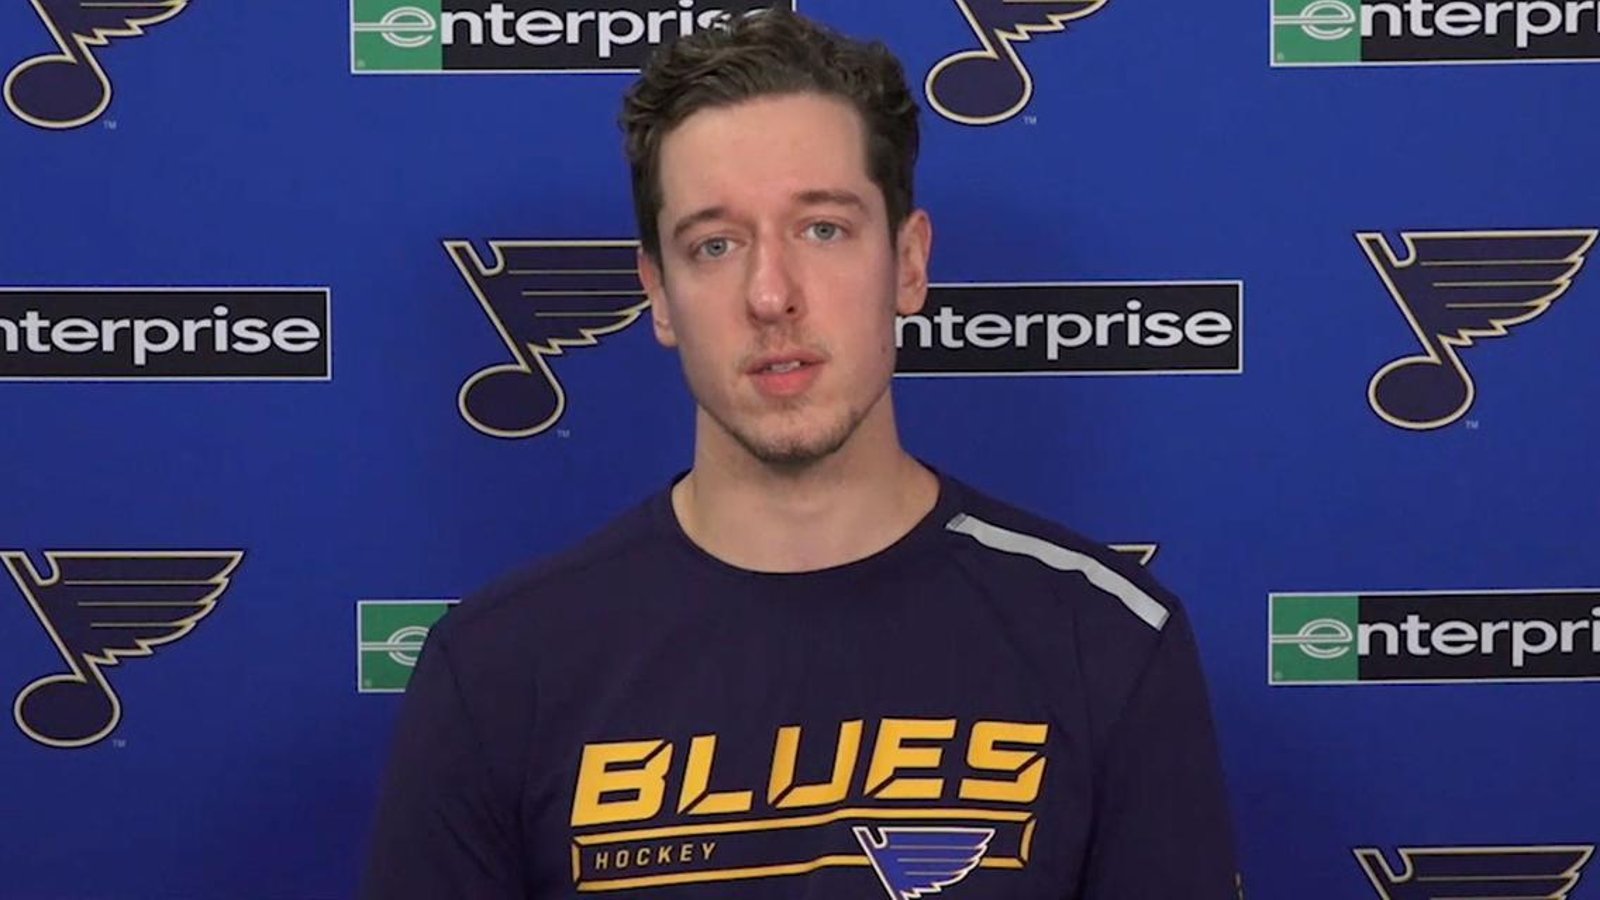 Jordan Binnington reacts to his suspension the only way he knows how!